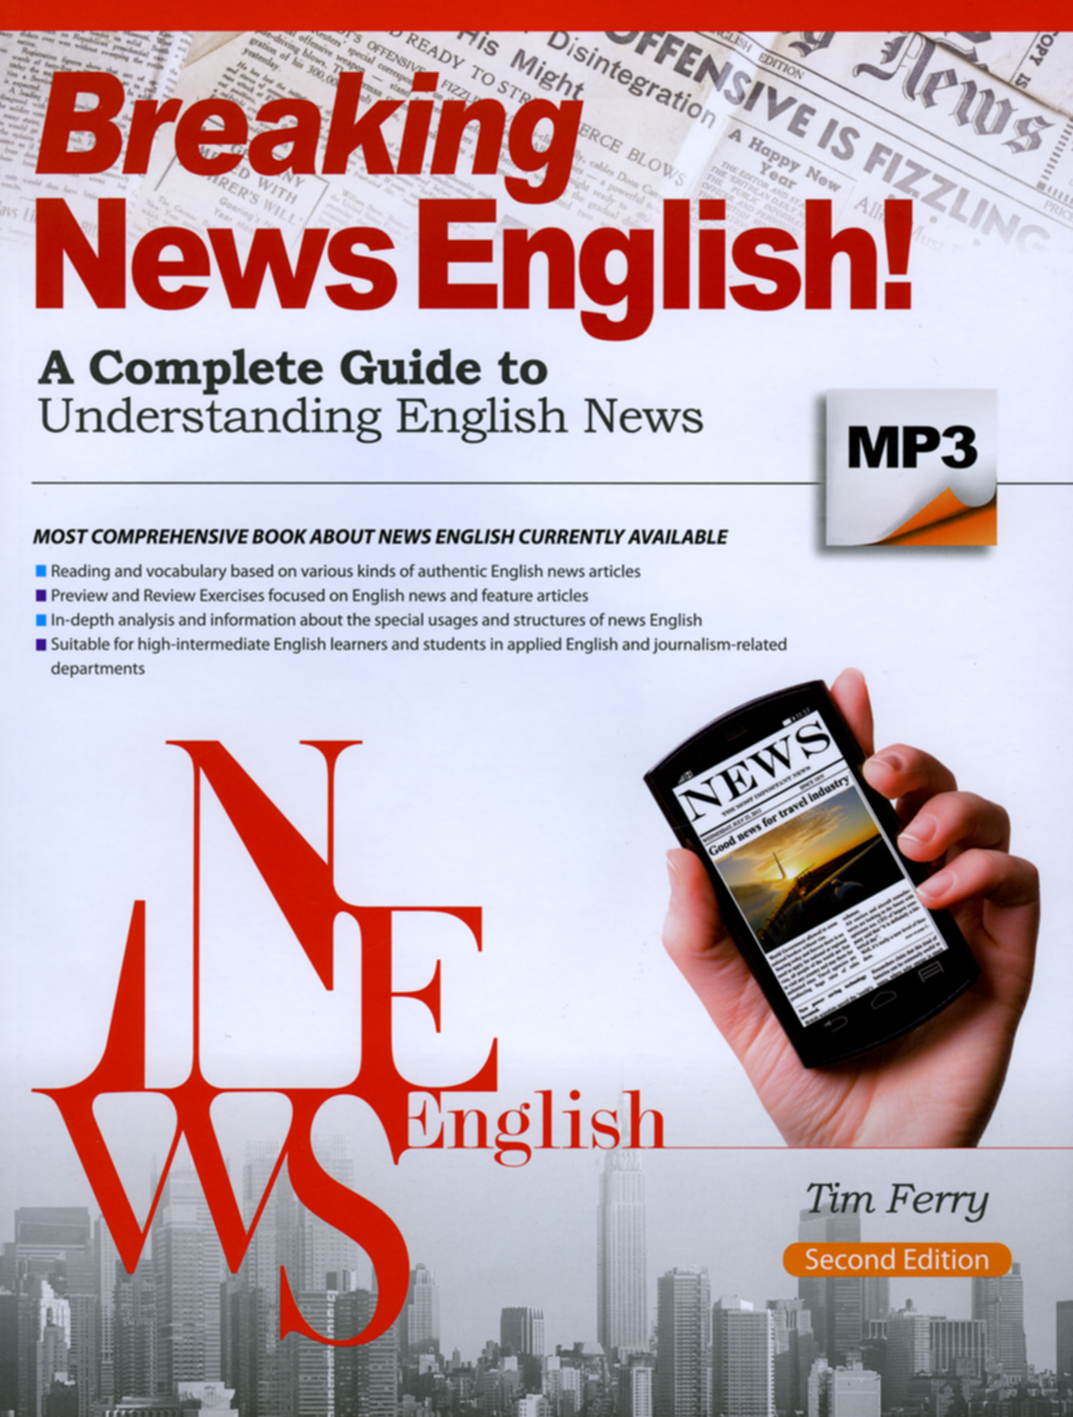 Breaking News English! A Complete Guide to Understanding English News (2nd edition)